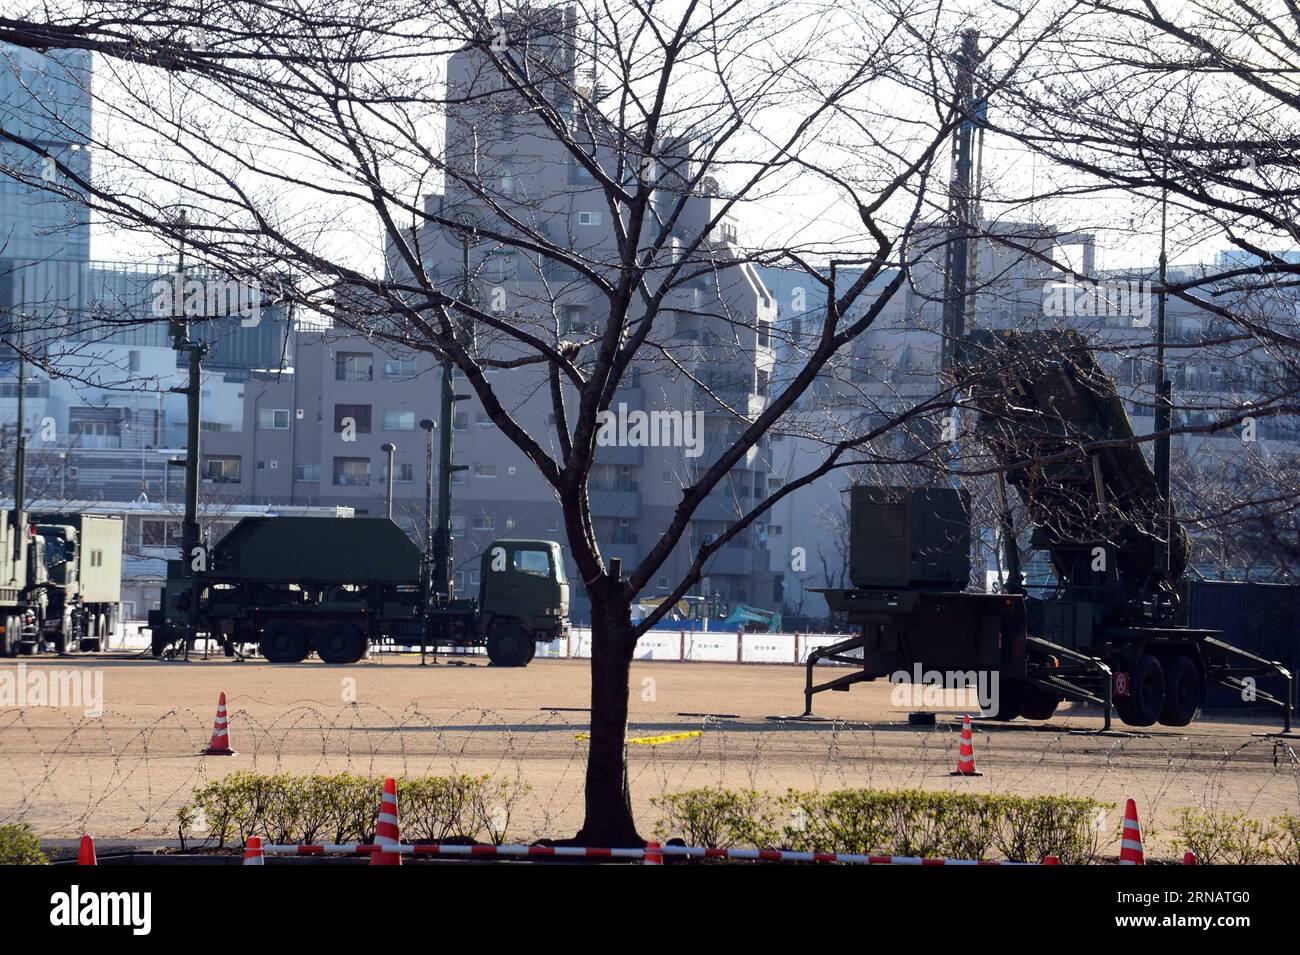 Japanese Self-Defense Force (SDF) Patriot Advanced Capability-3 (PAC-3) interceptor launchers are deployed in Tokyo, Japan, on Feb. 7, 2016. The Japanese SDF did not take any destroy action to a rocket launched by the Democratic People s Republic of Korea (DPRK) earlier Sunday heading for the direction of Japan s southernmost prefecture of Okinawa. The Japanese government ordered its SDF to interrupt incoming rockets launched by the DPRK if they threaten safety of Japan. Anti-missile rockets were deployed in Okinawa. ) JAPAN-TOKYO-DPRK ROCEKT LAUNCH-PRECAUTION MaxPing PUBLICATIONxNOTxINxCHN Stock Photo